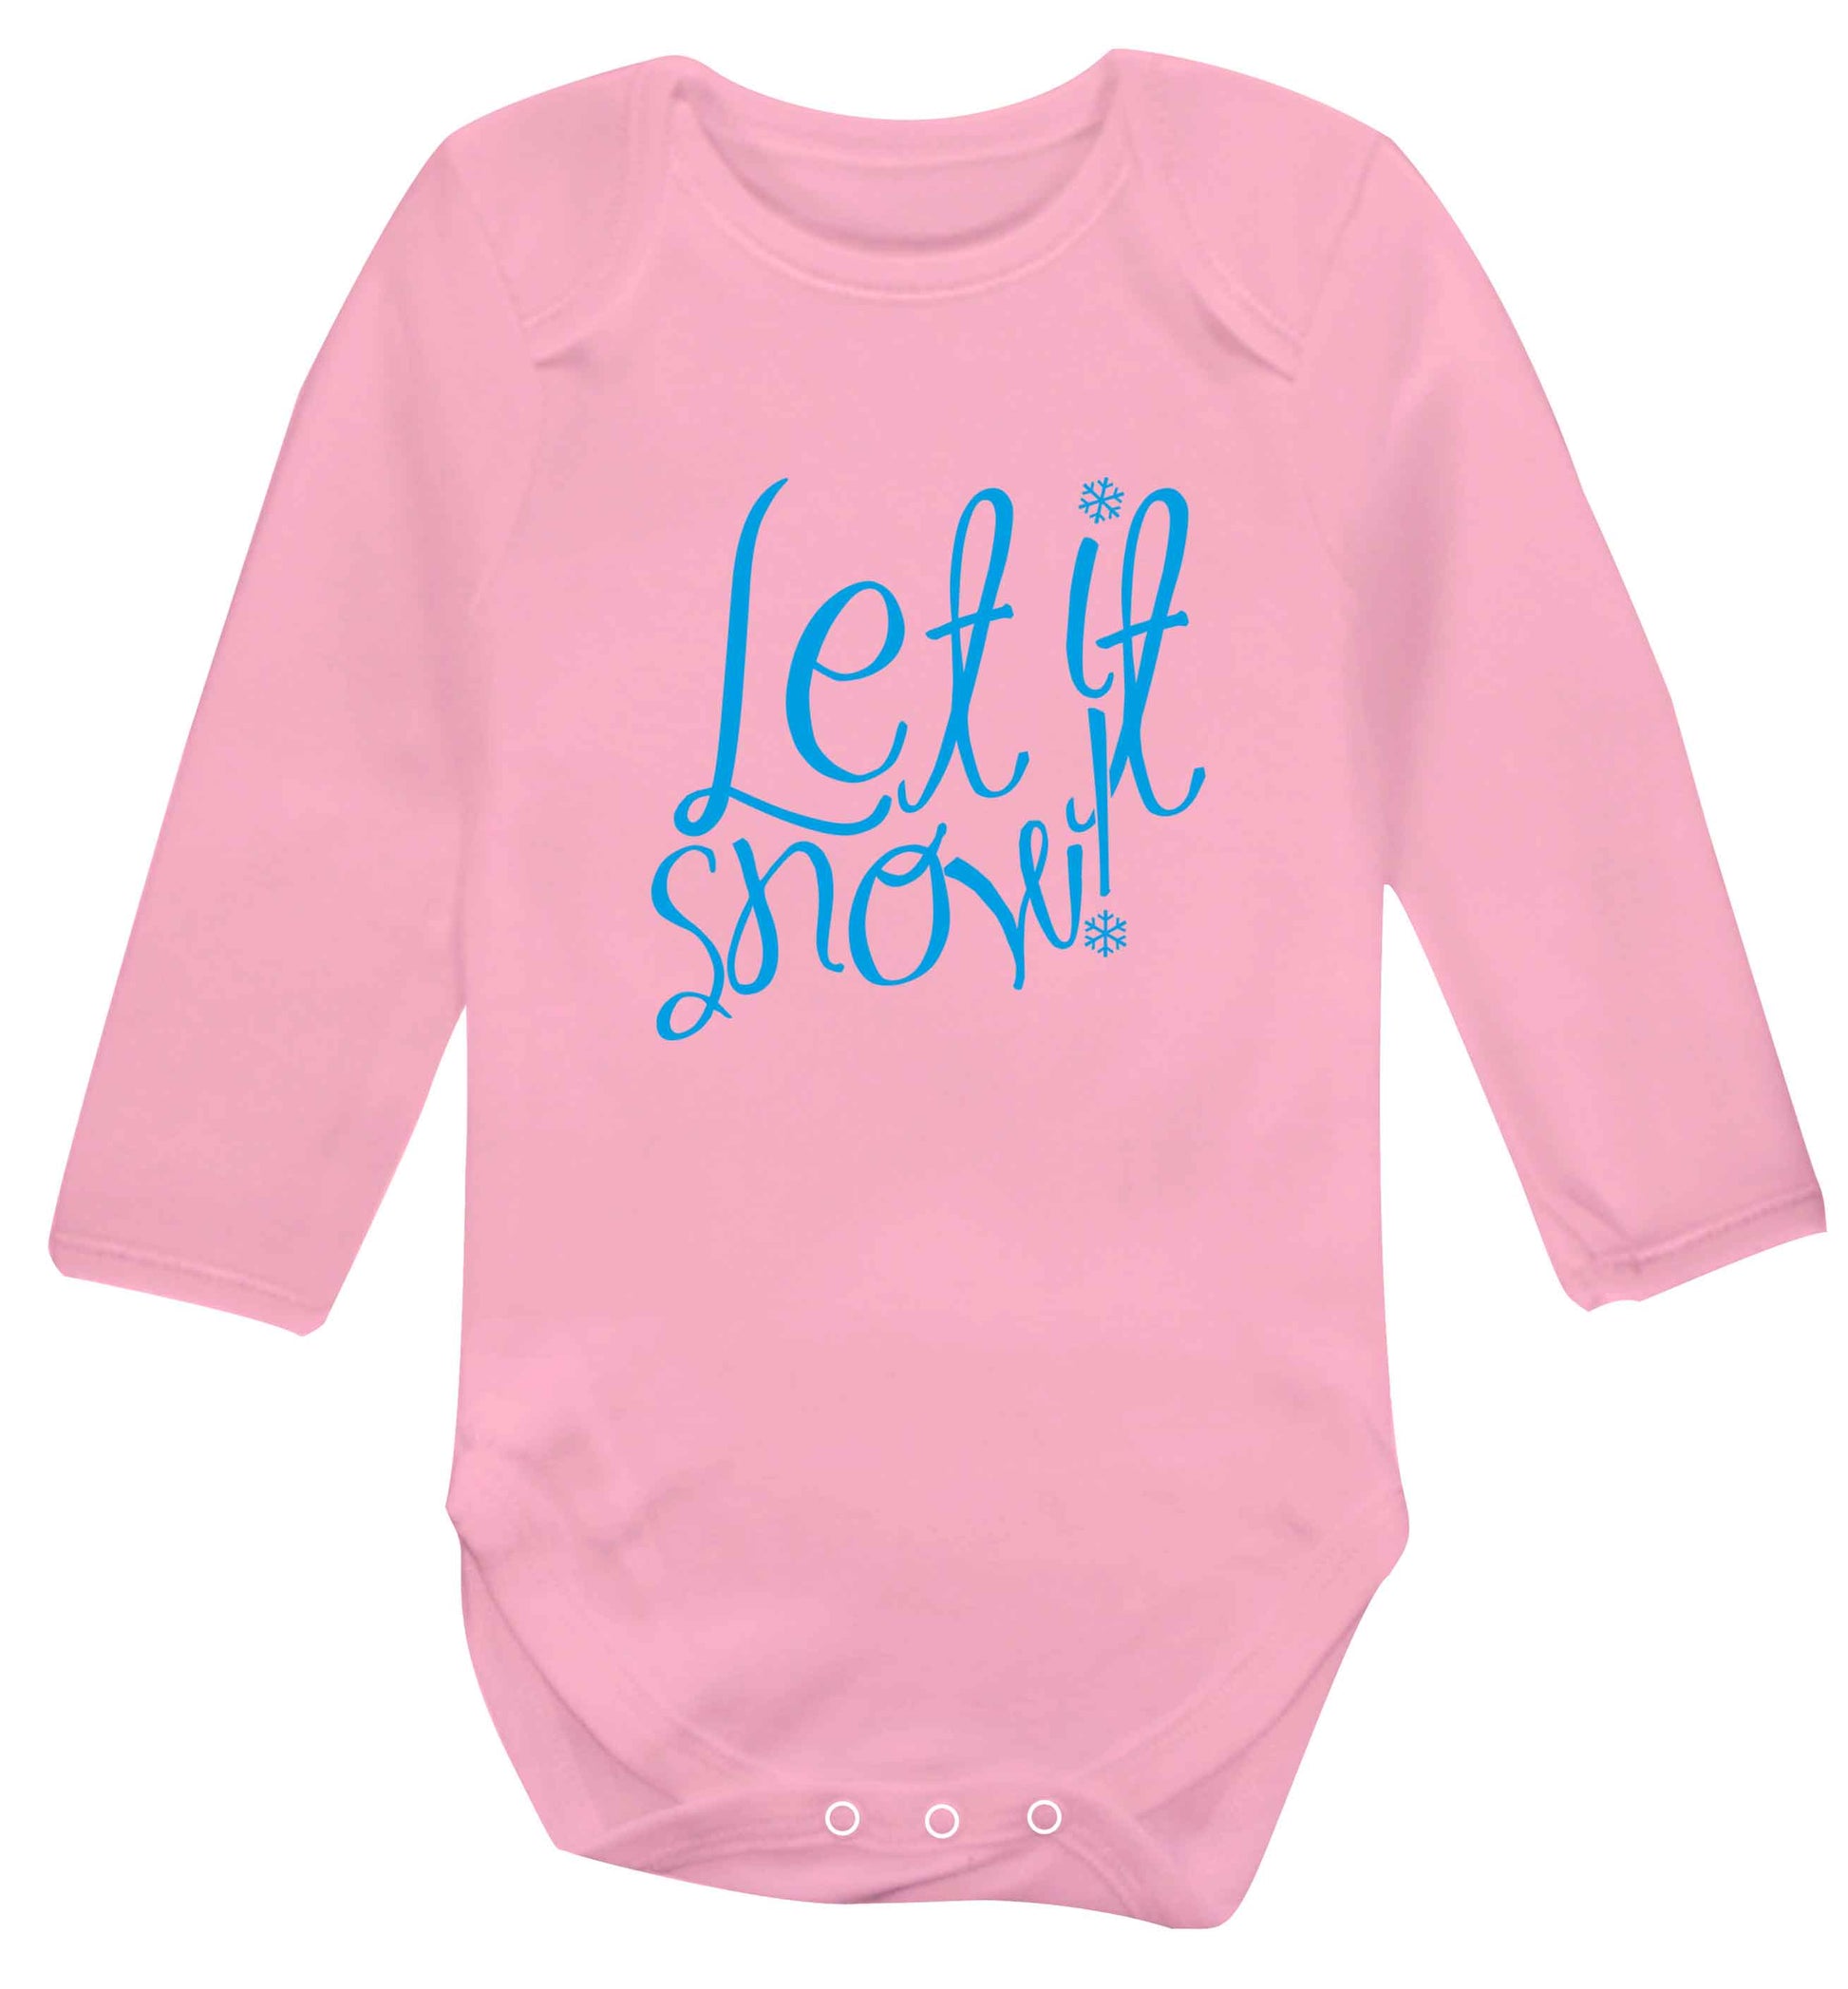 Let it snow baby vest long sleeved pale pink 6-12 months